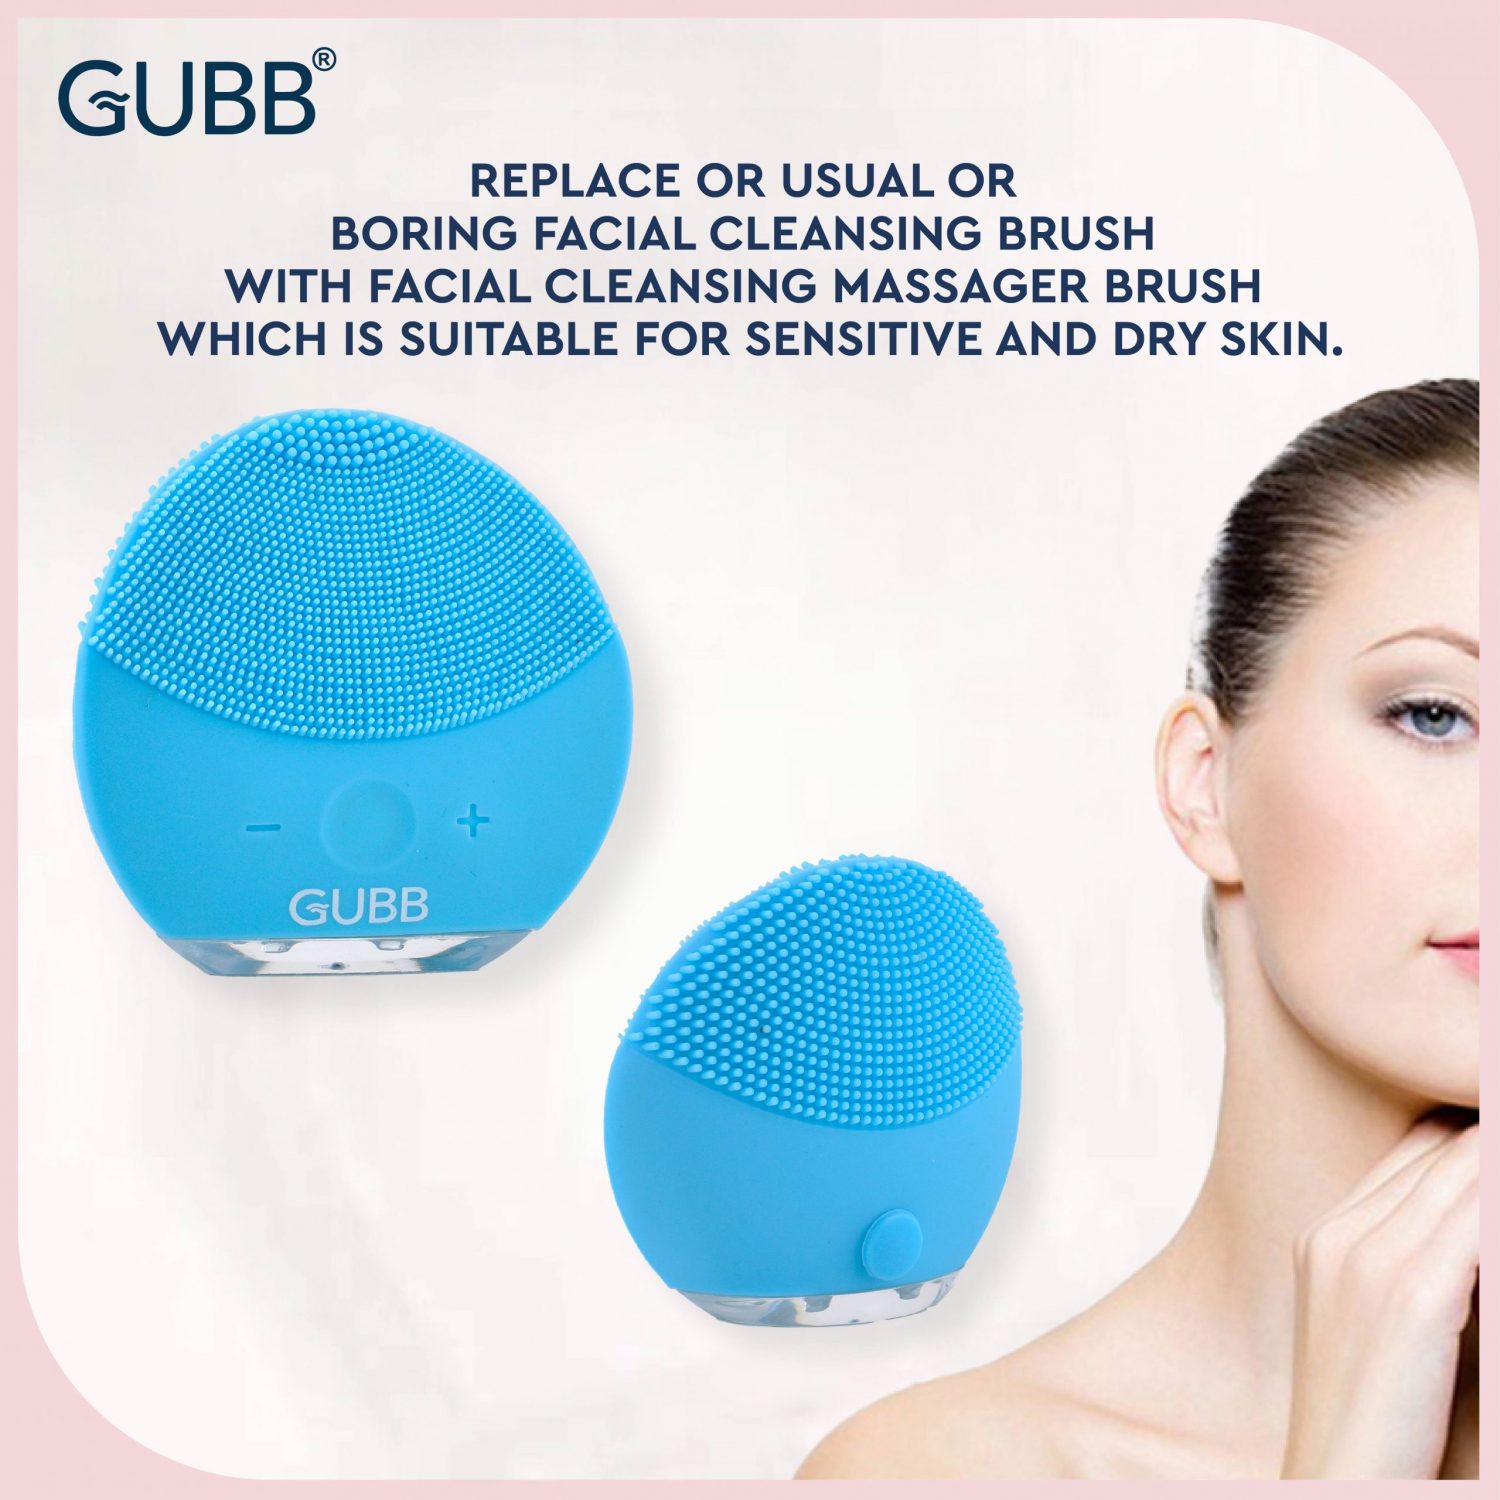 Facial Cleansing Massager Brush With USB